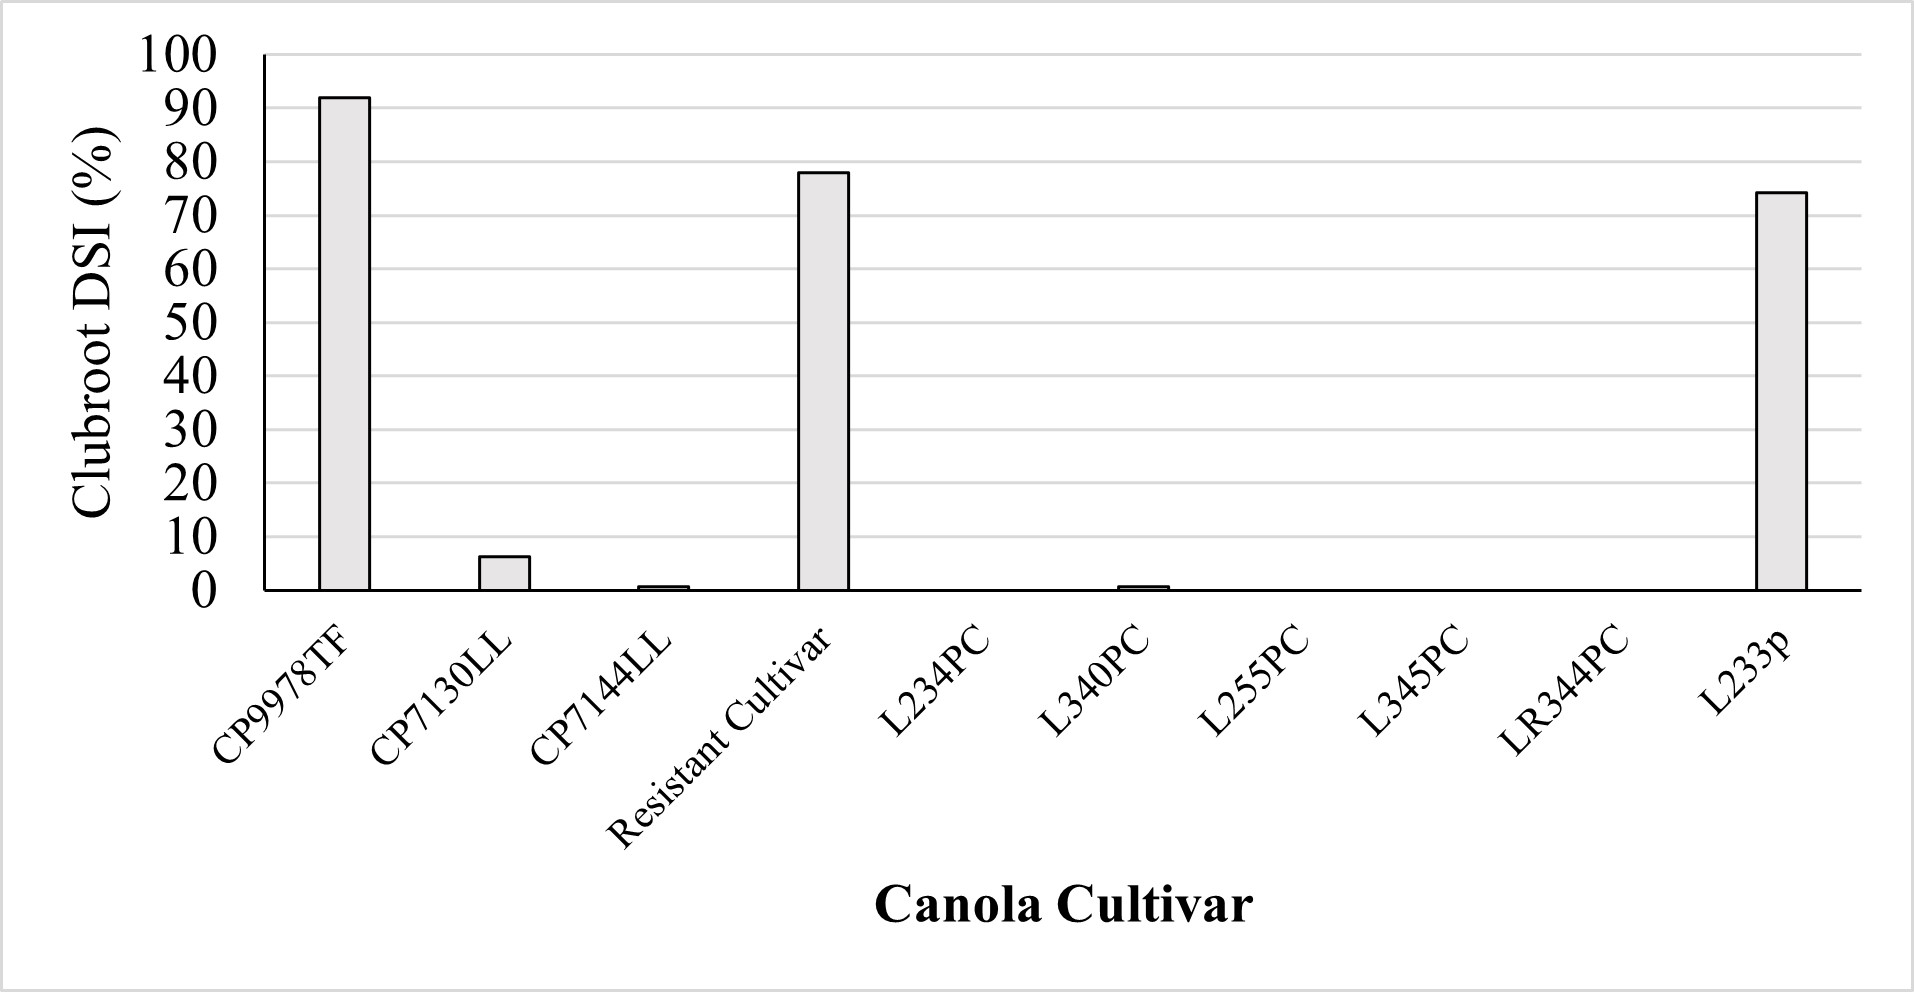 Mean clubroot disease index (%) recorded on various commercial cultivars of canola tested in 2021.